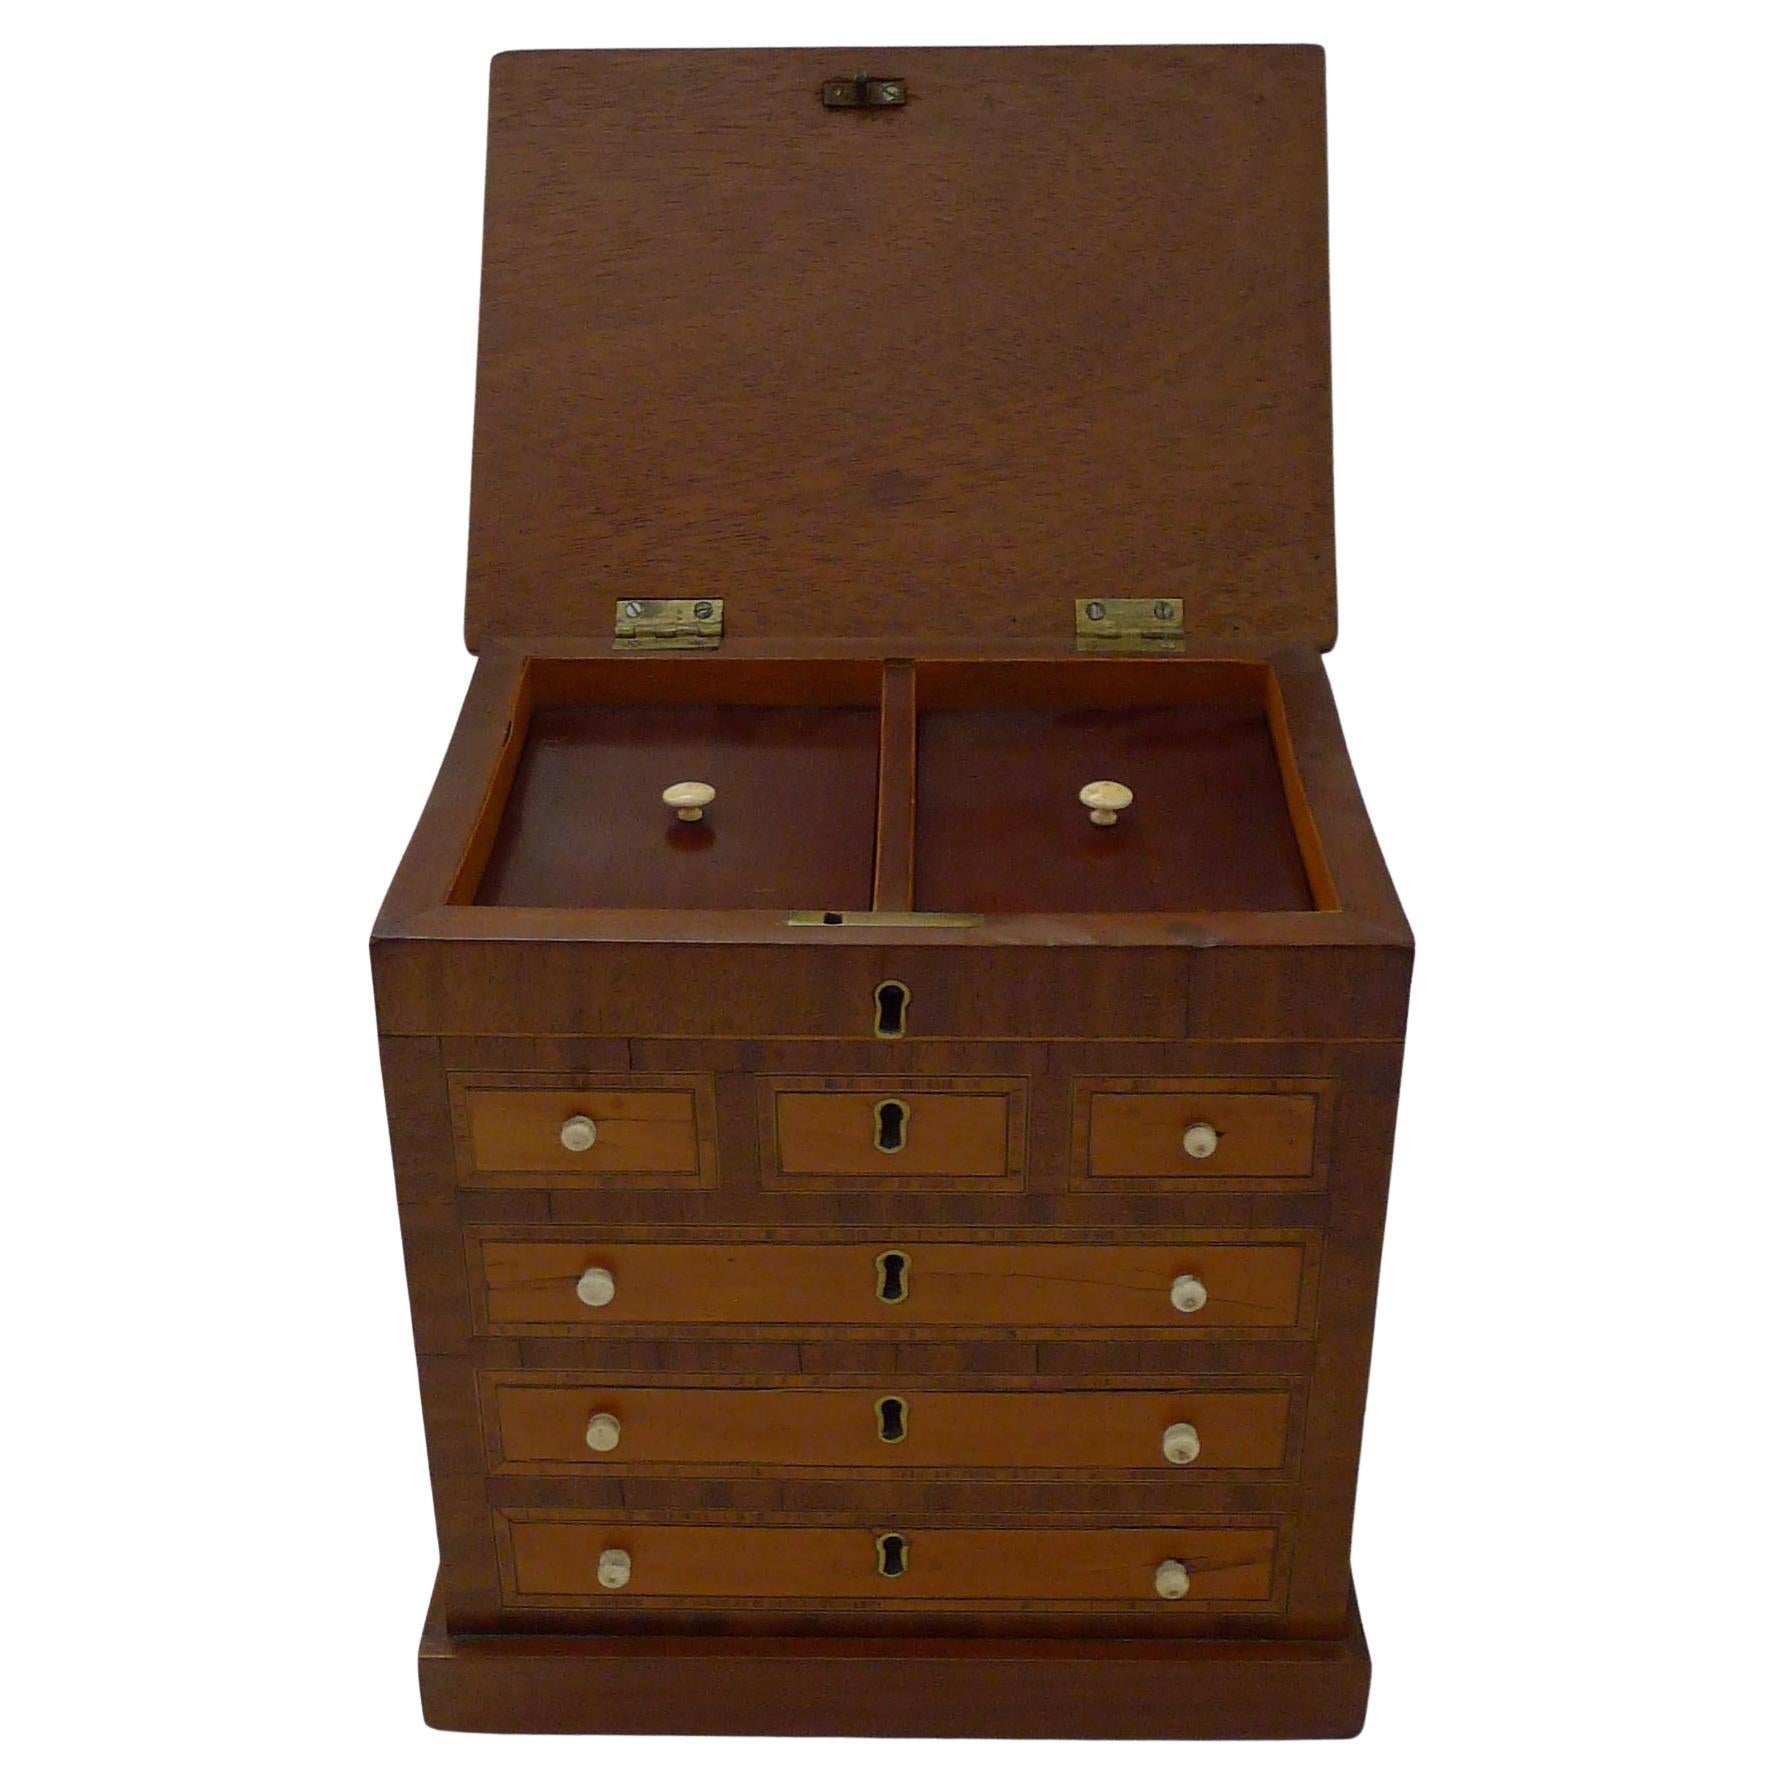 Rare English Mahogany Tea Caddy - Form of Chest of Drawers c.1880 For Sale